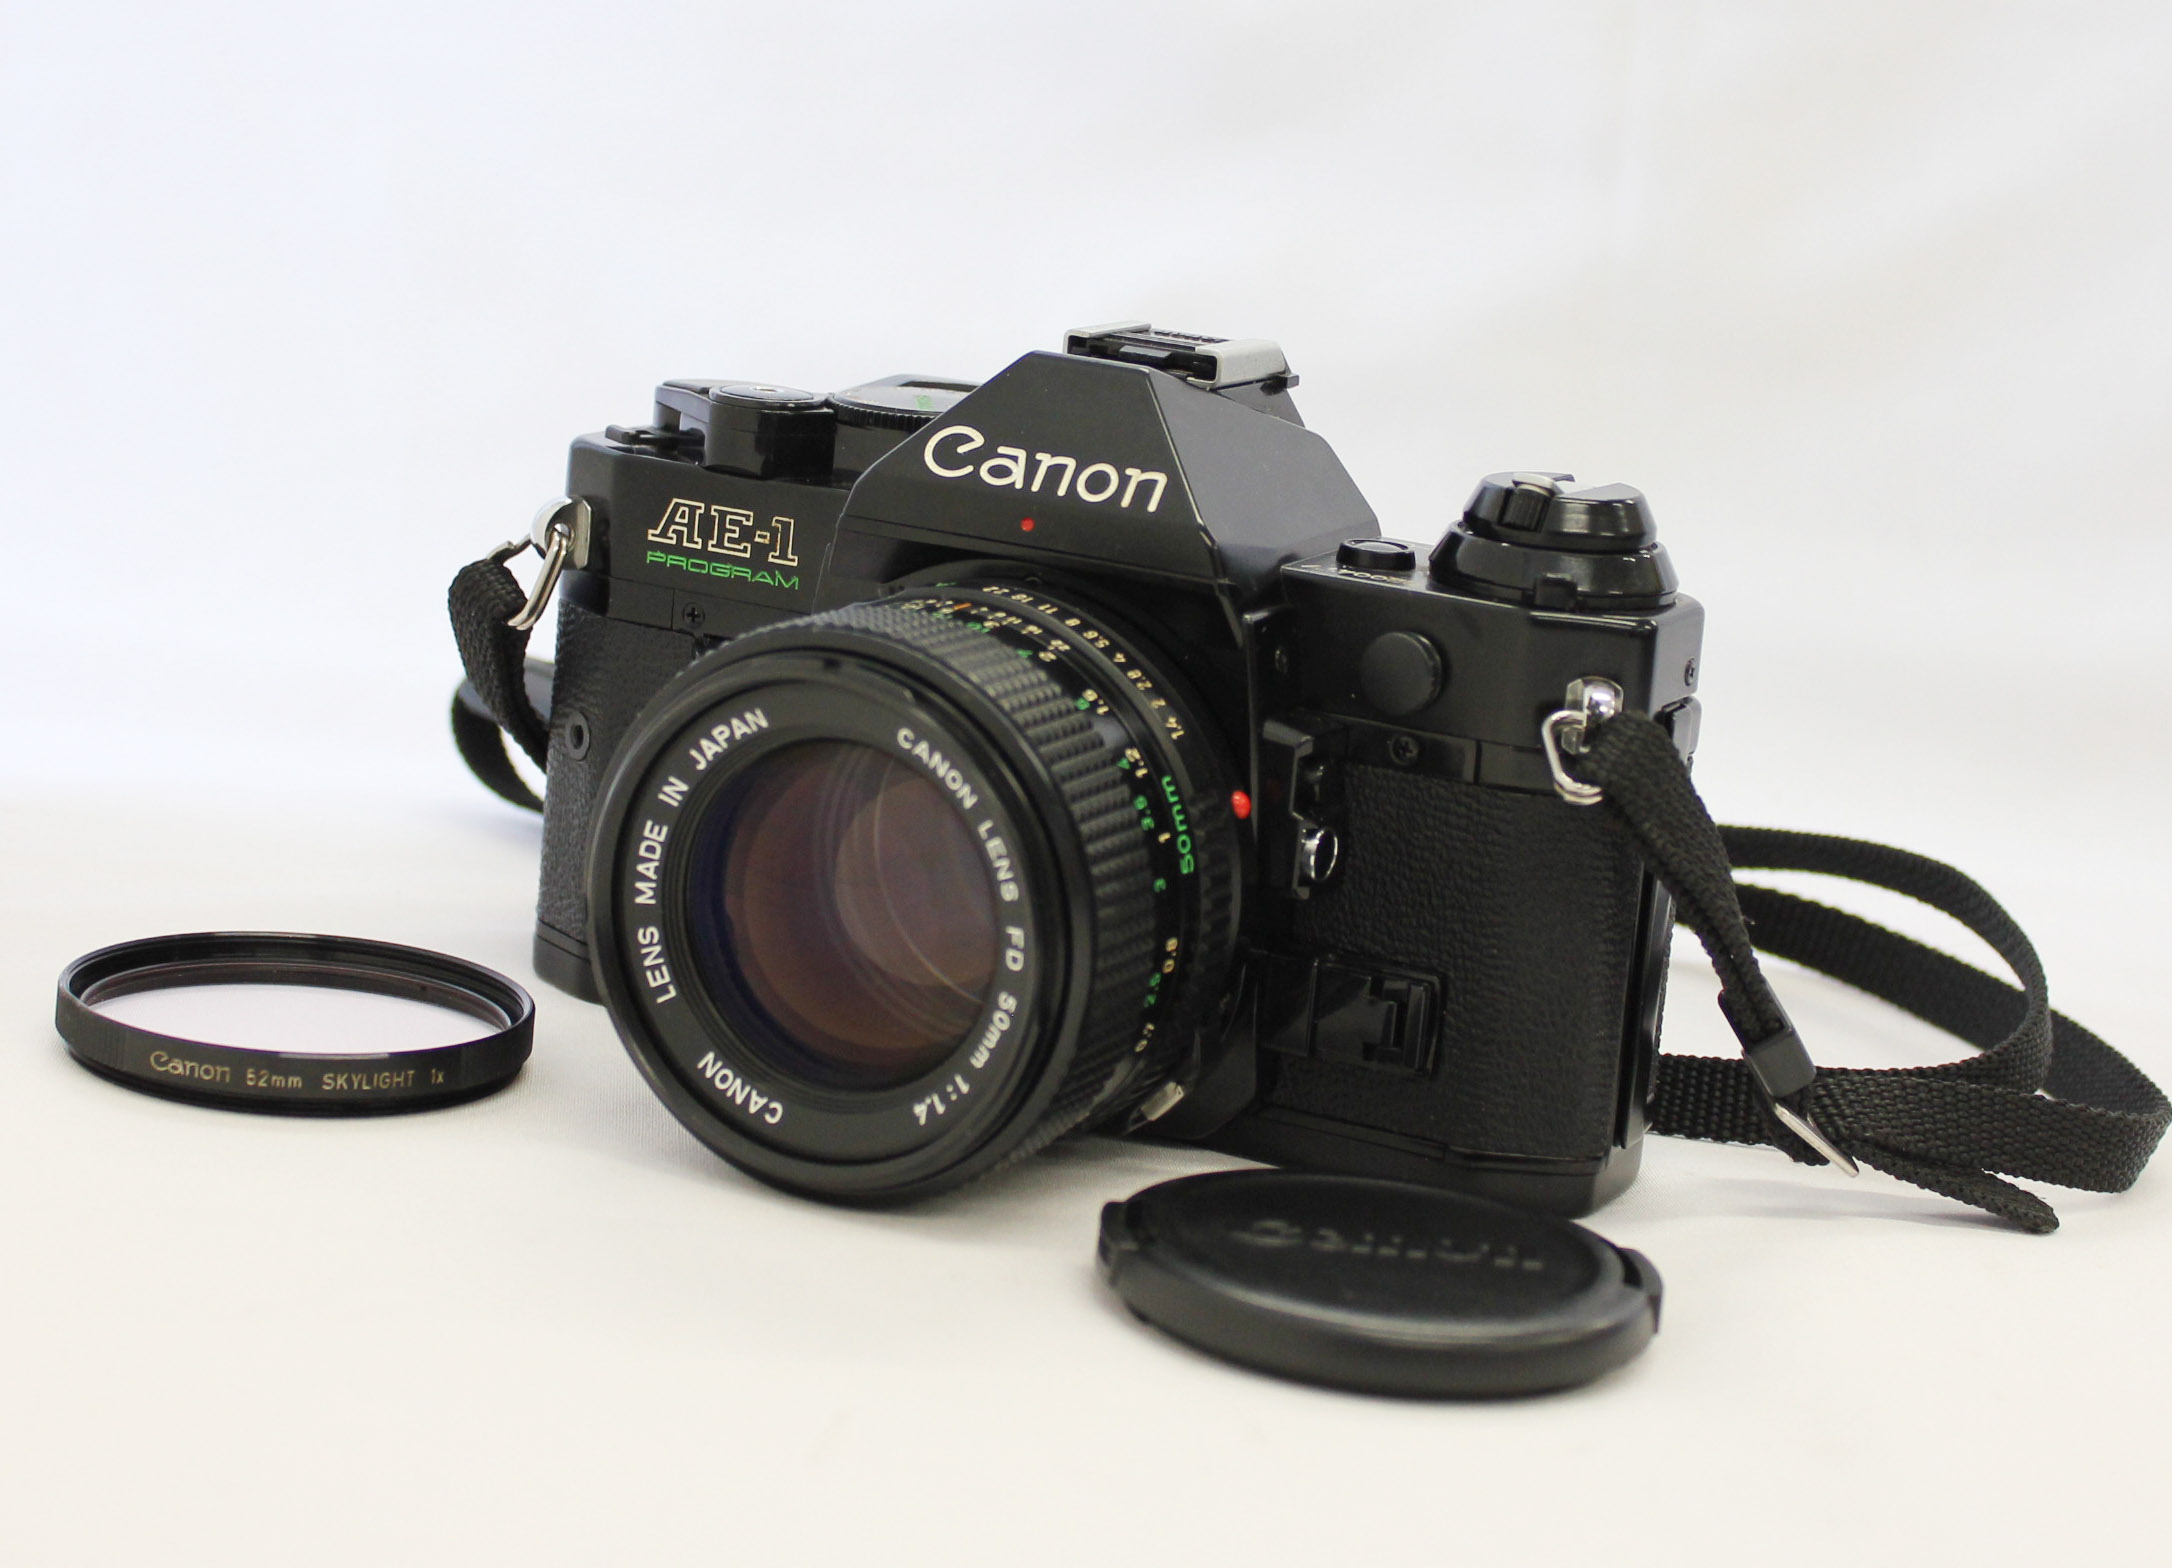 Japan Used Camera Shop | [Exc++++] Canon AE-1 Program 35mm SLR Film Camera Black with New FD 50mm F/1.4 Lens from Japan